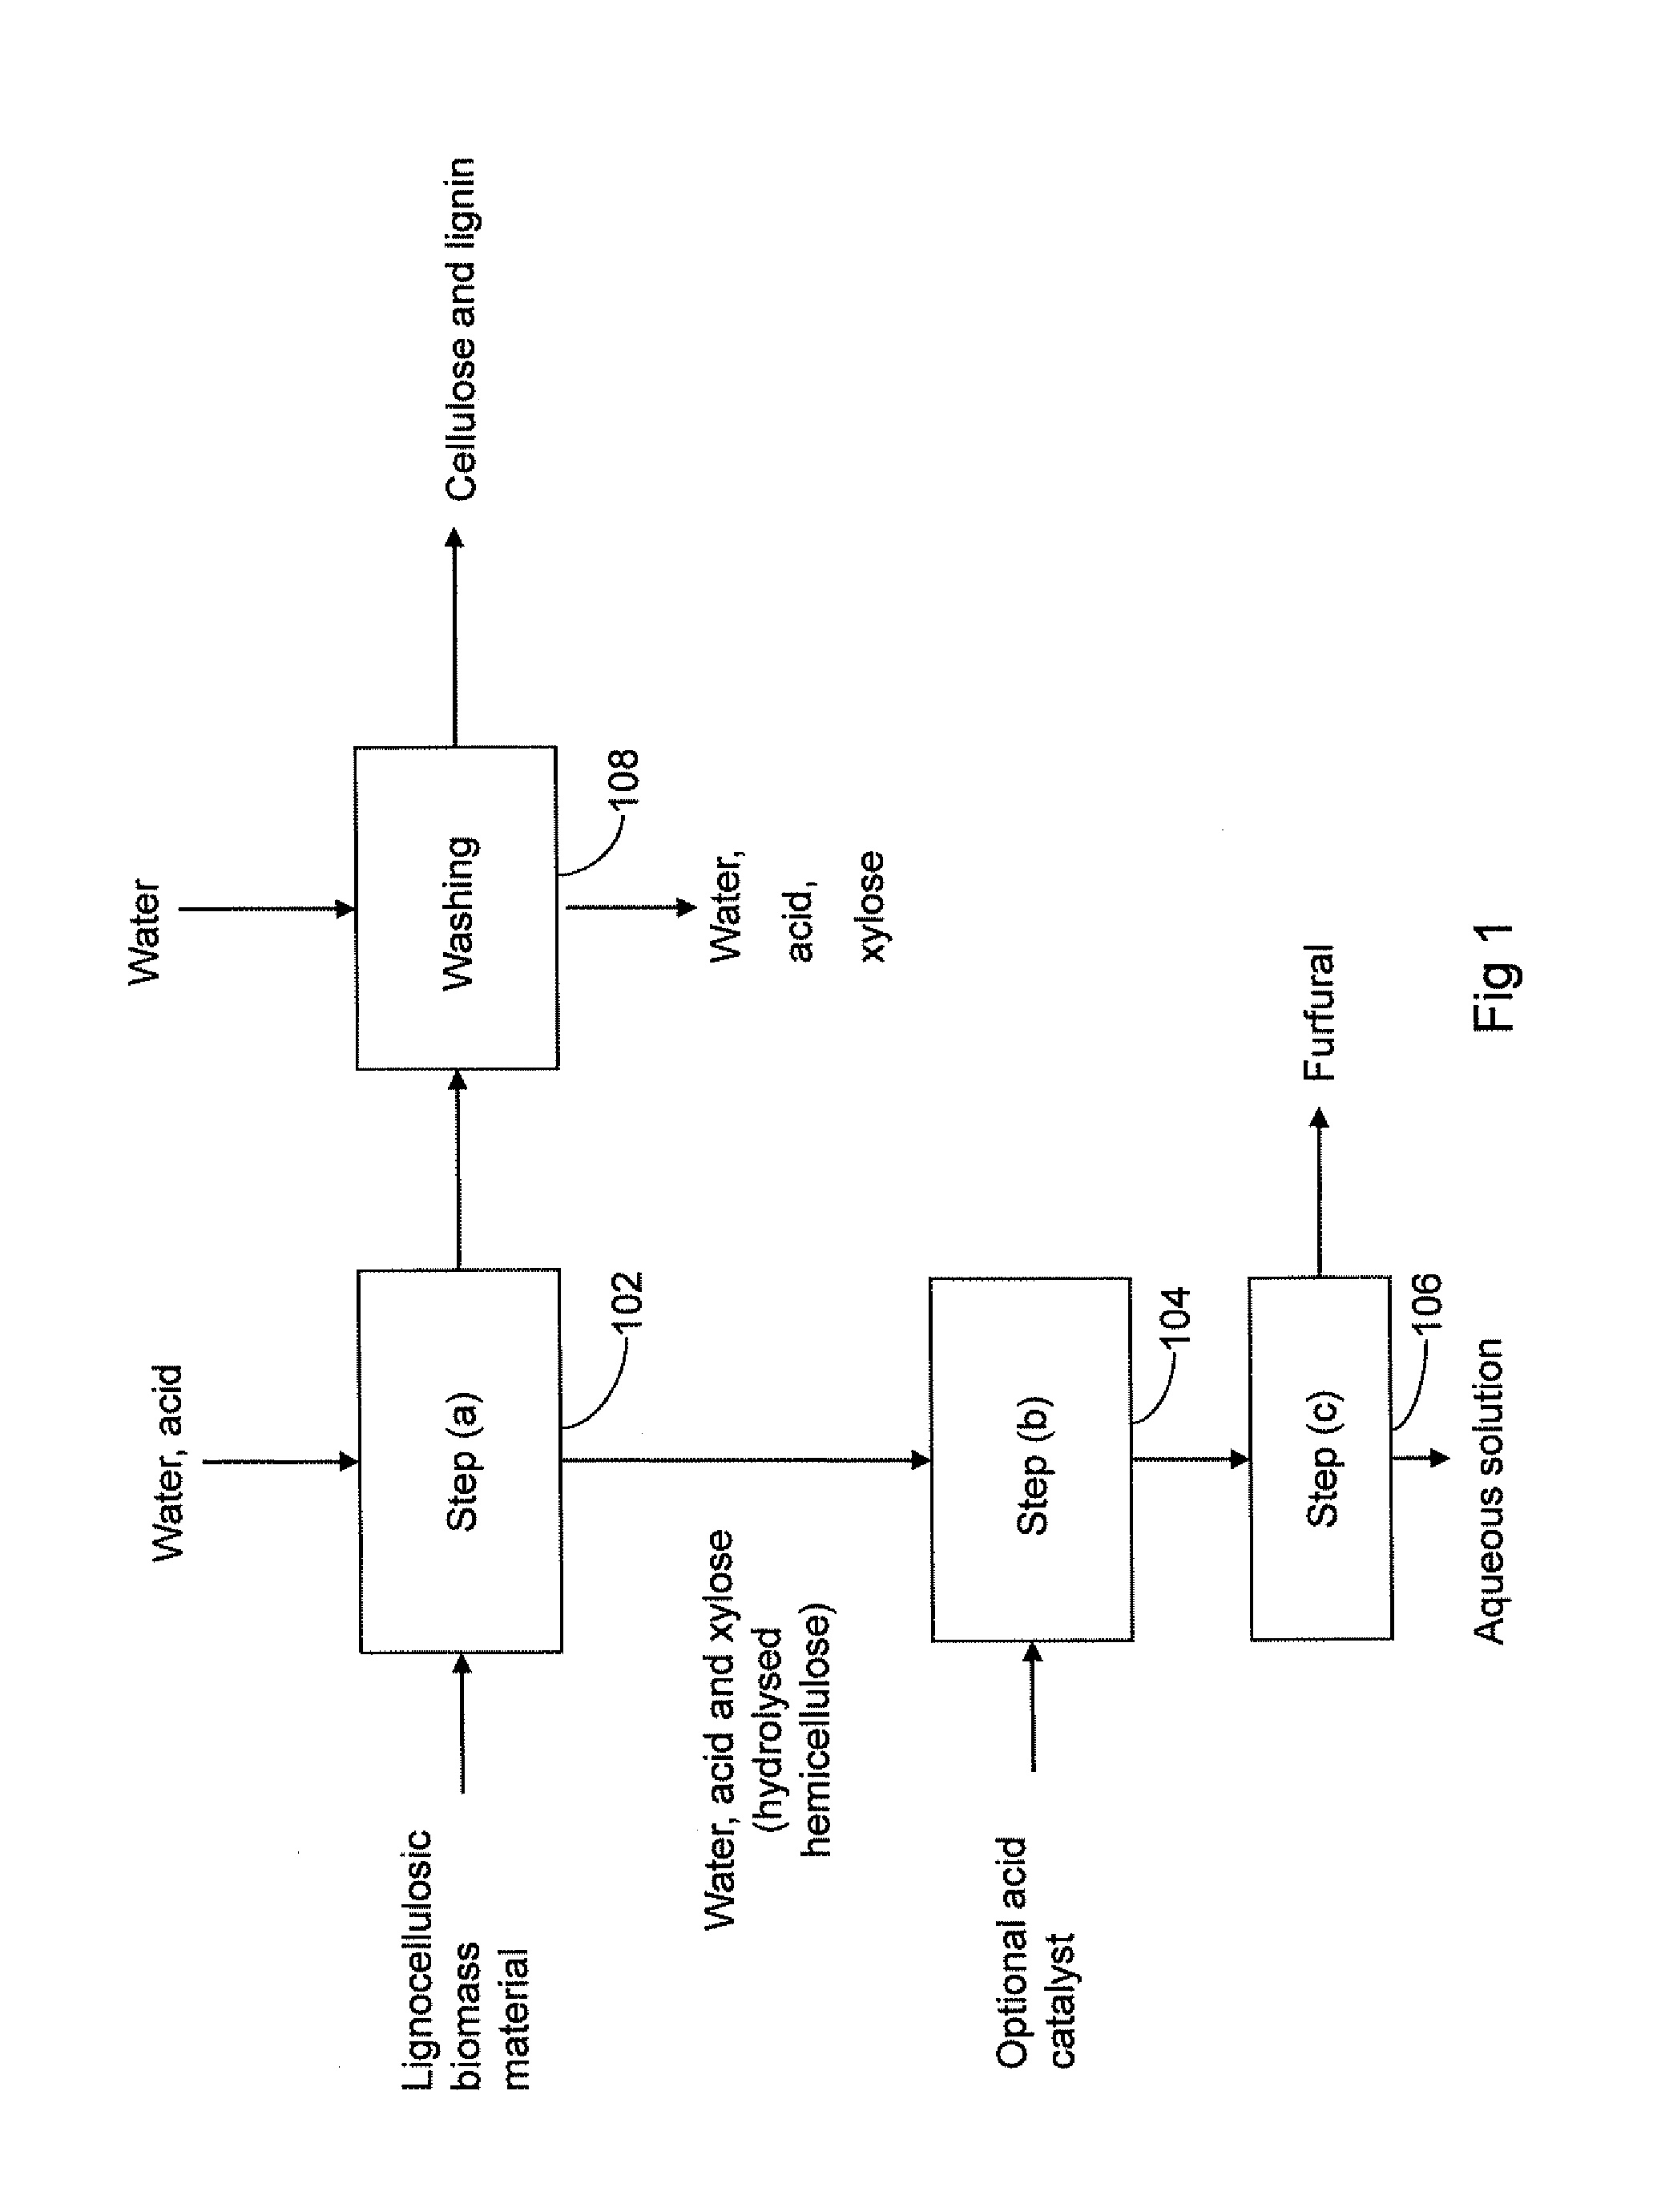 Method for producing furfural from lignocellulosic biomass material